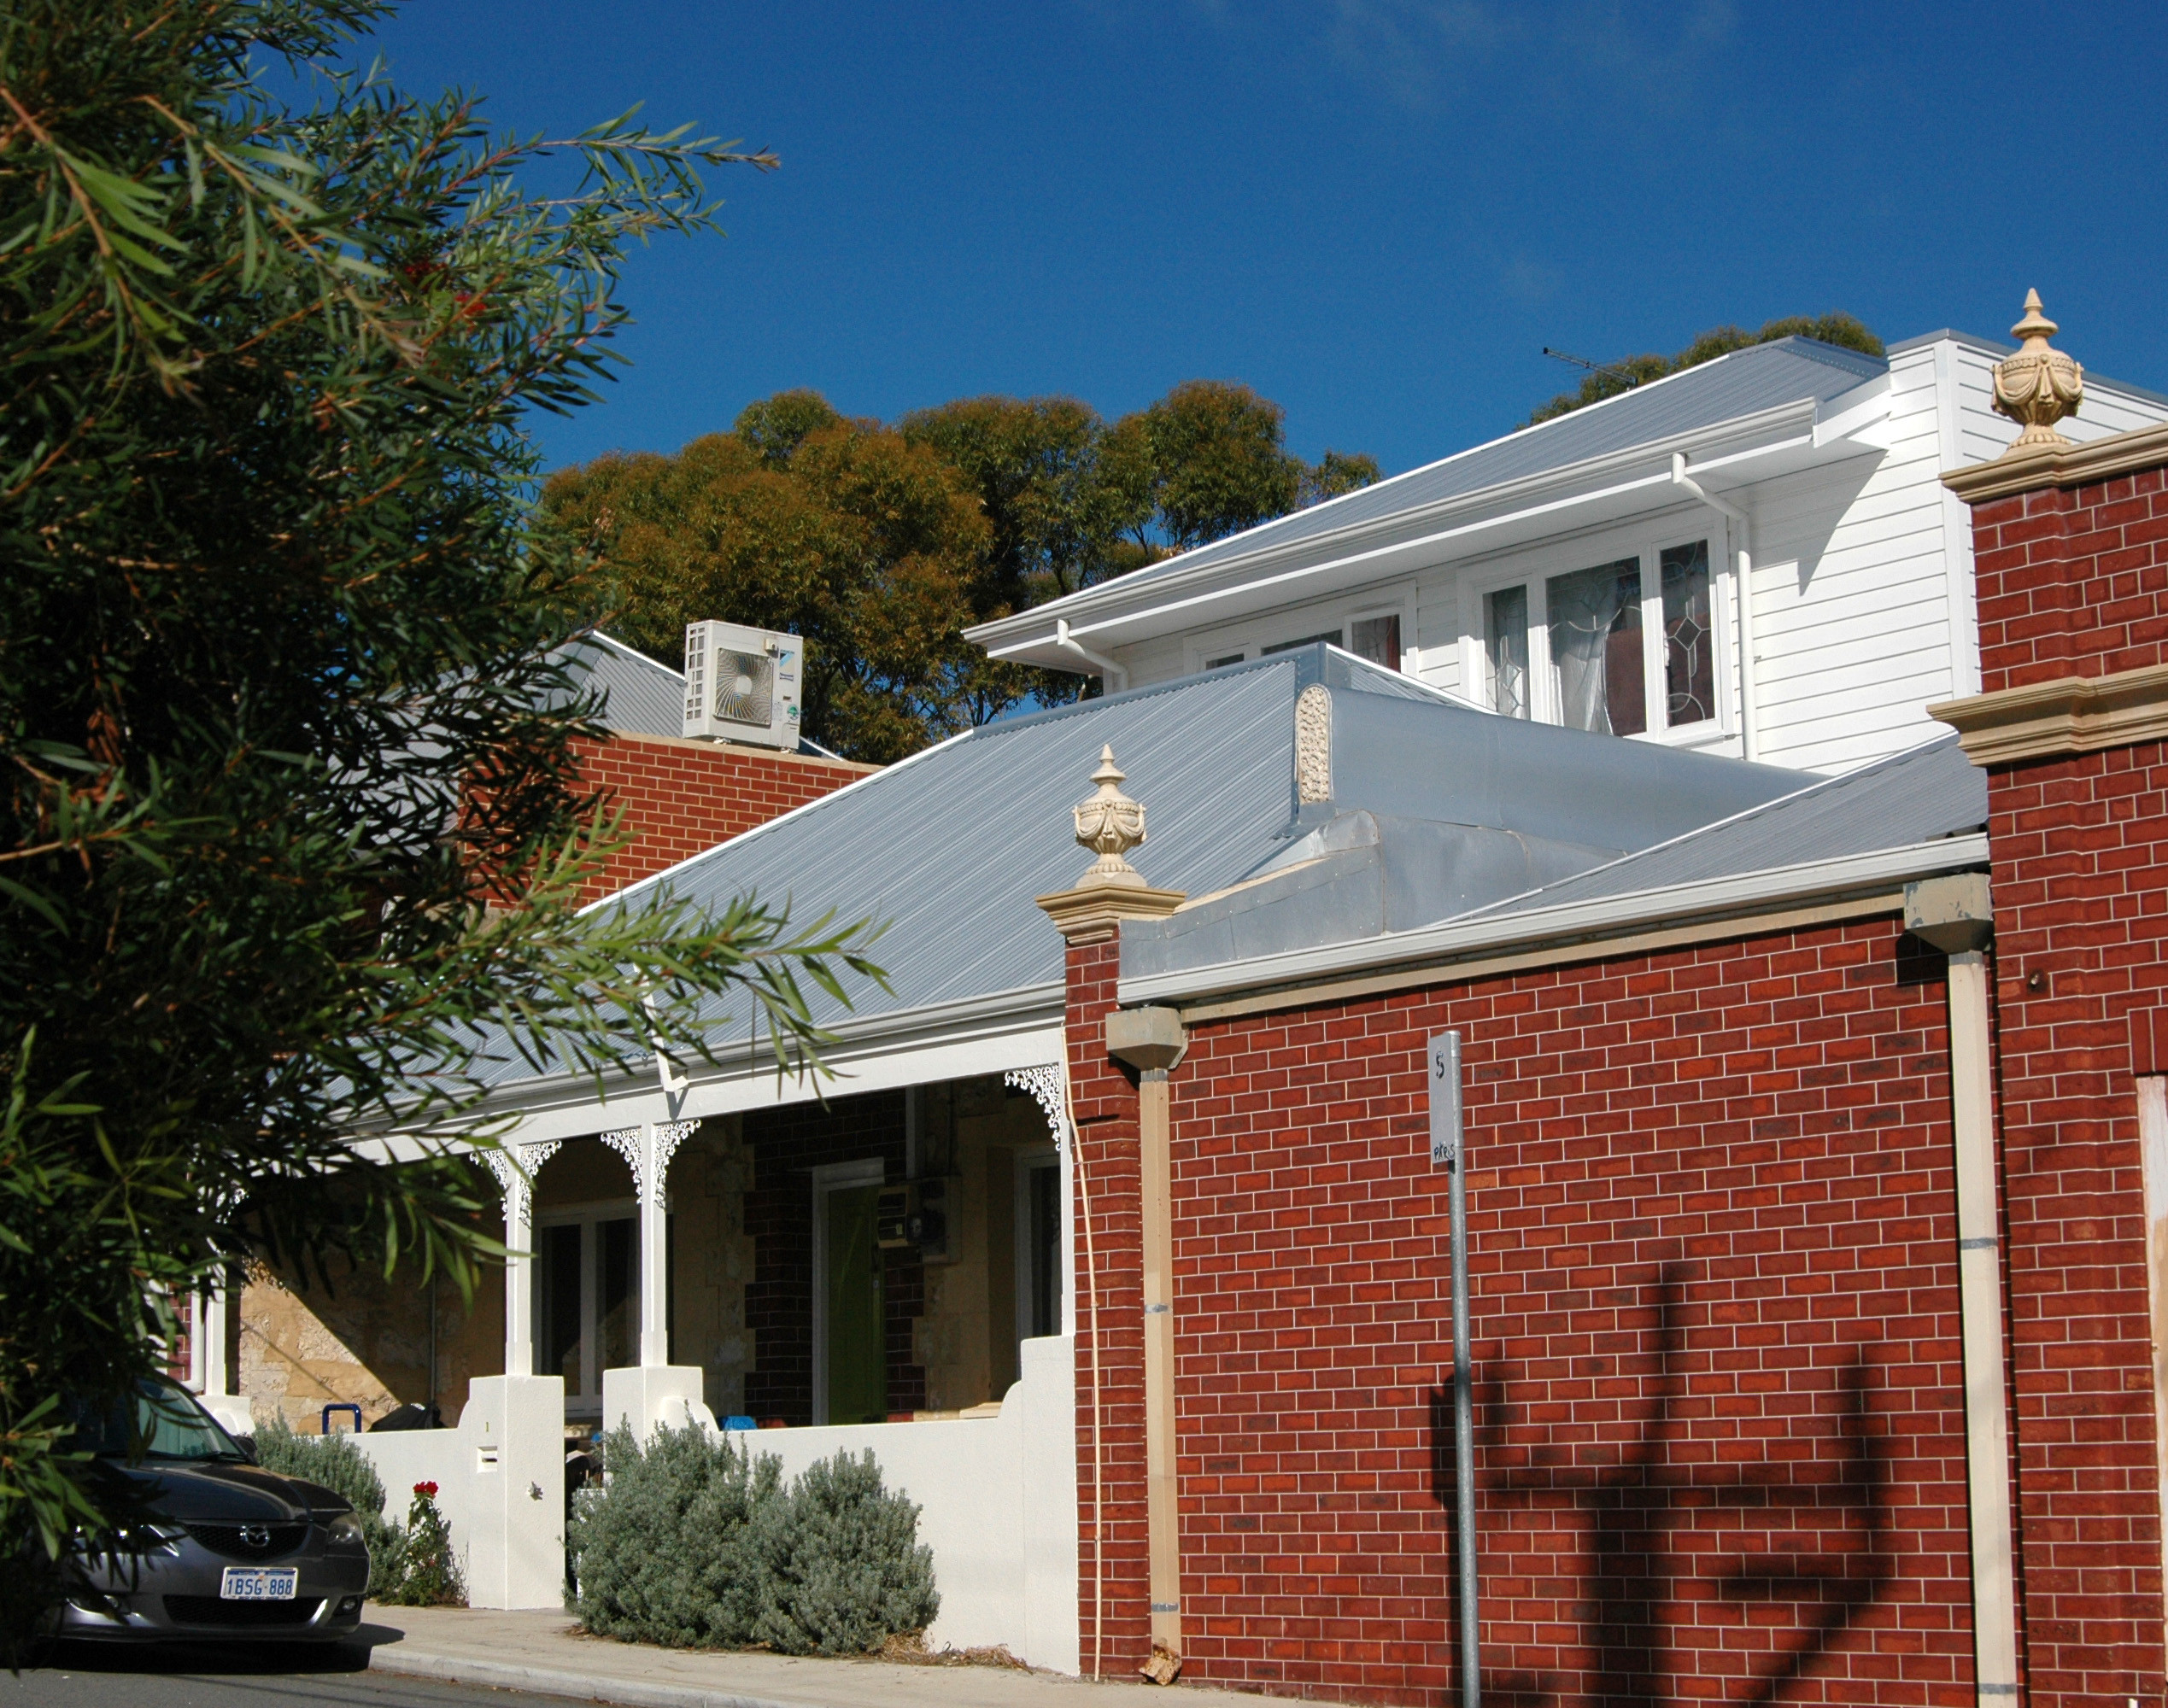 South Freo Heritage